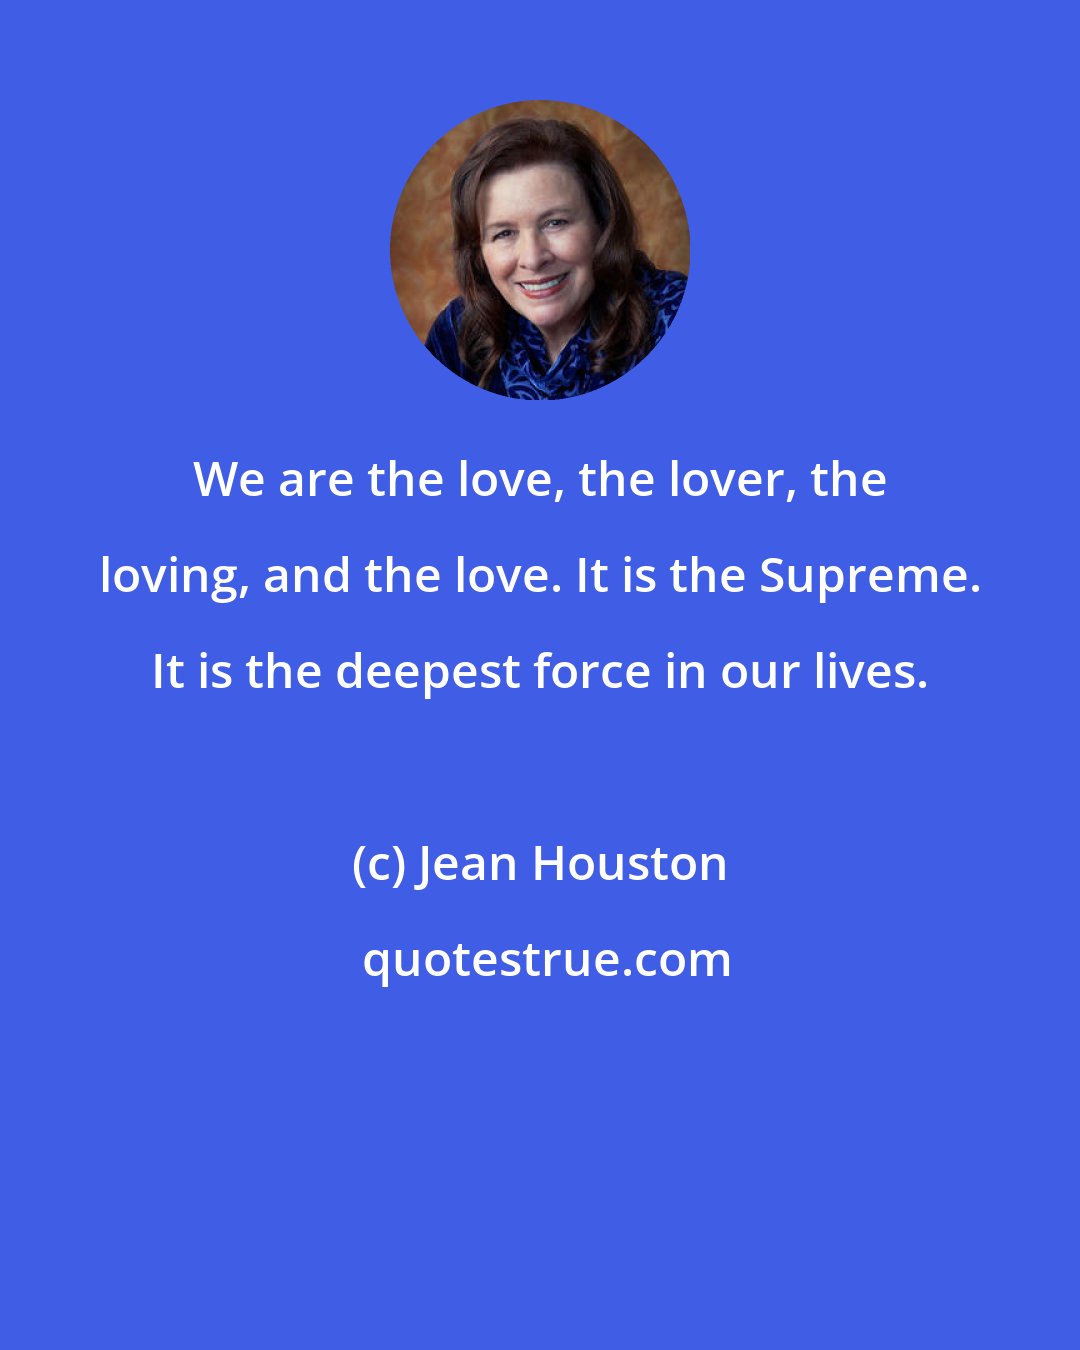 Jean Houston: We are the love, the lover, the loving, and the love. It is the Supreme. It is the deepest force in our lives.